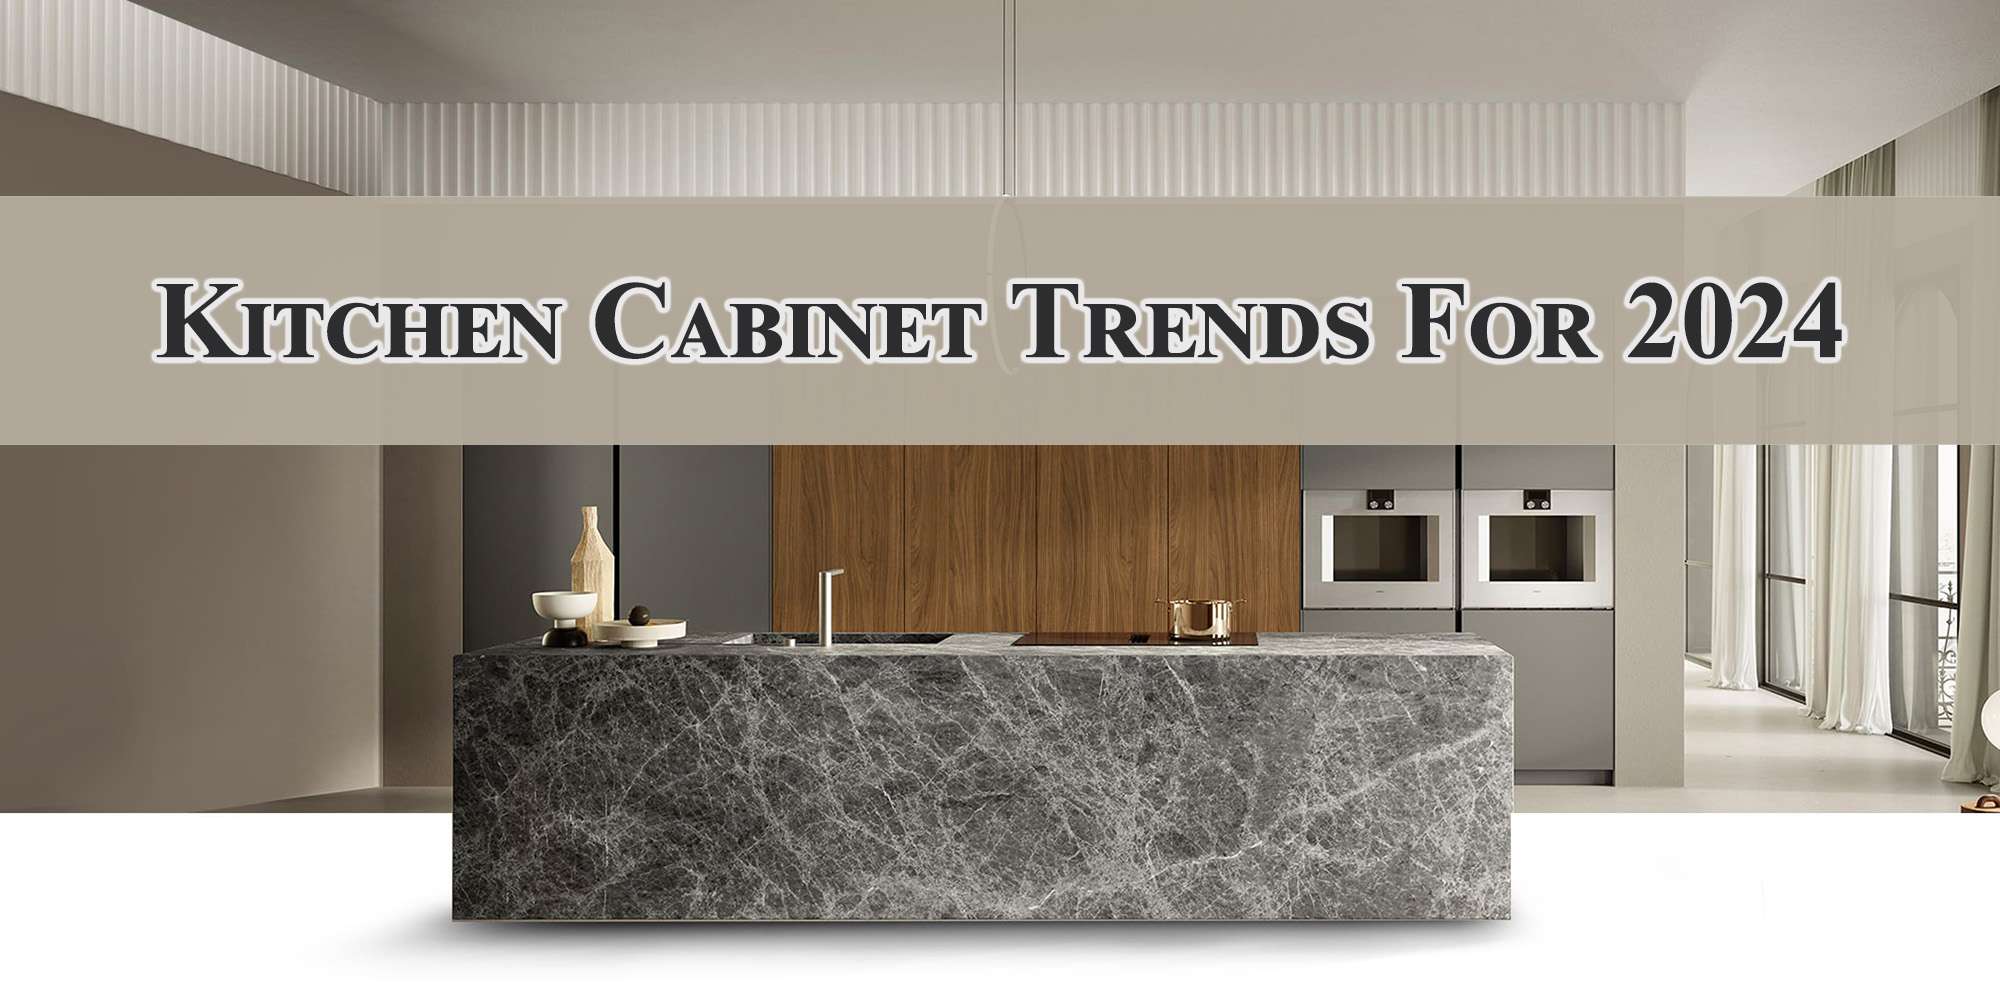 Kitchen Trends For 2024